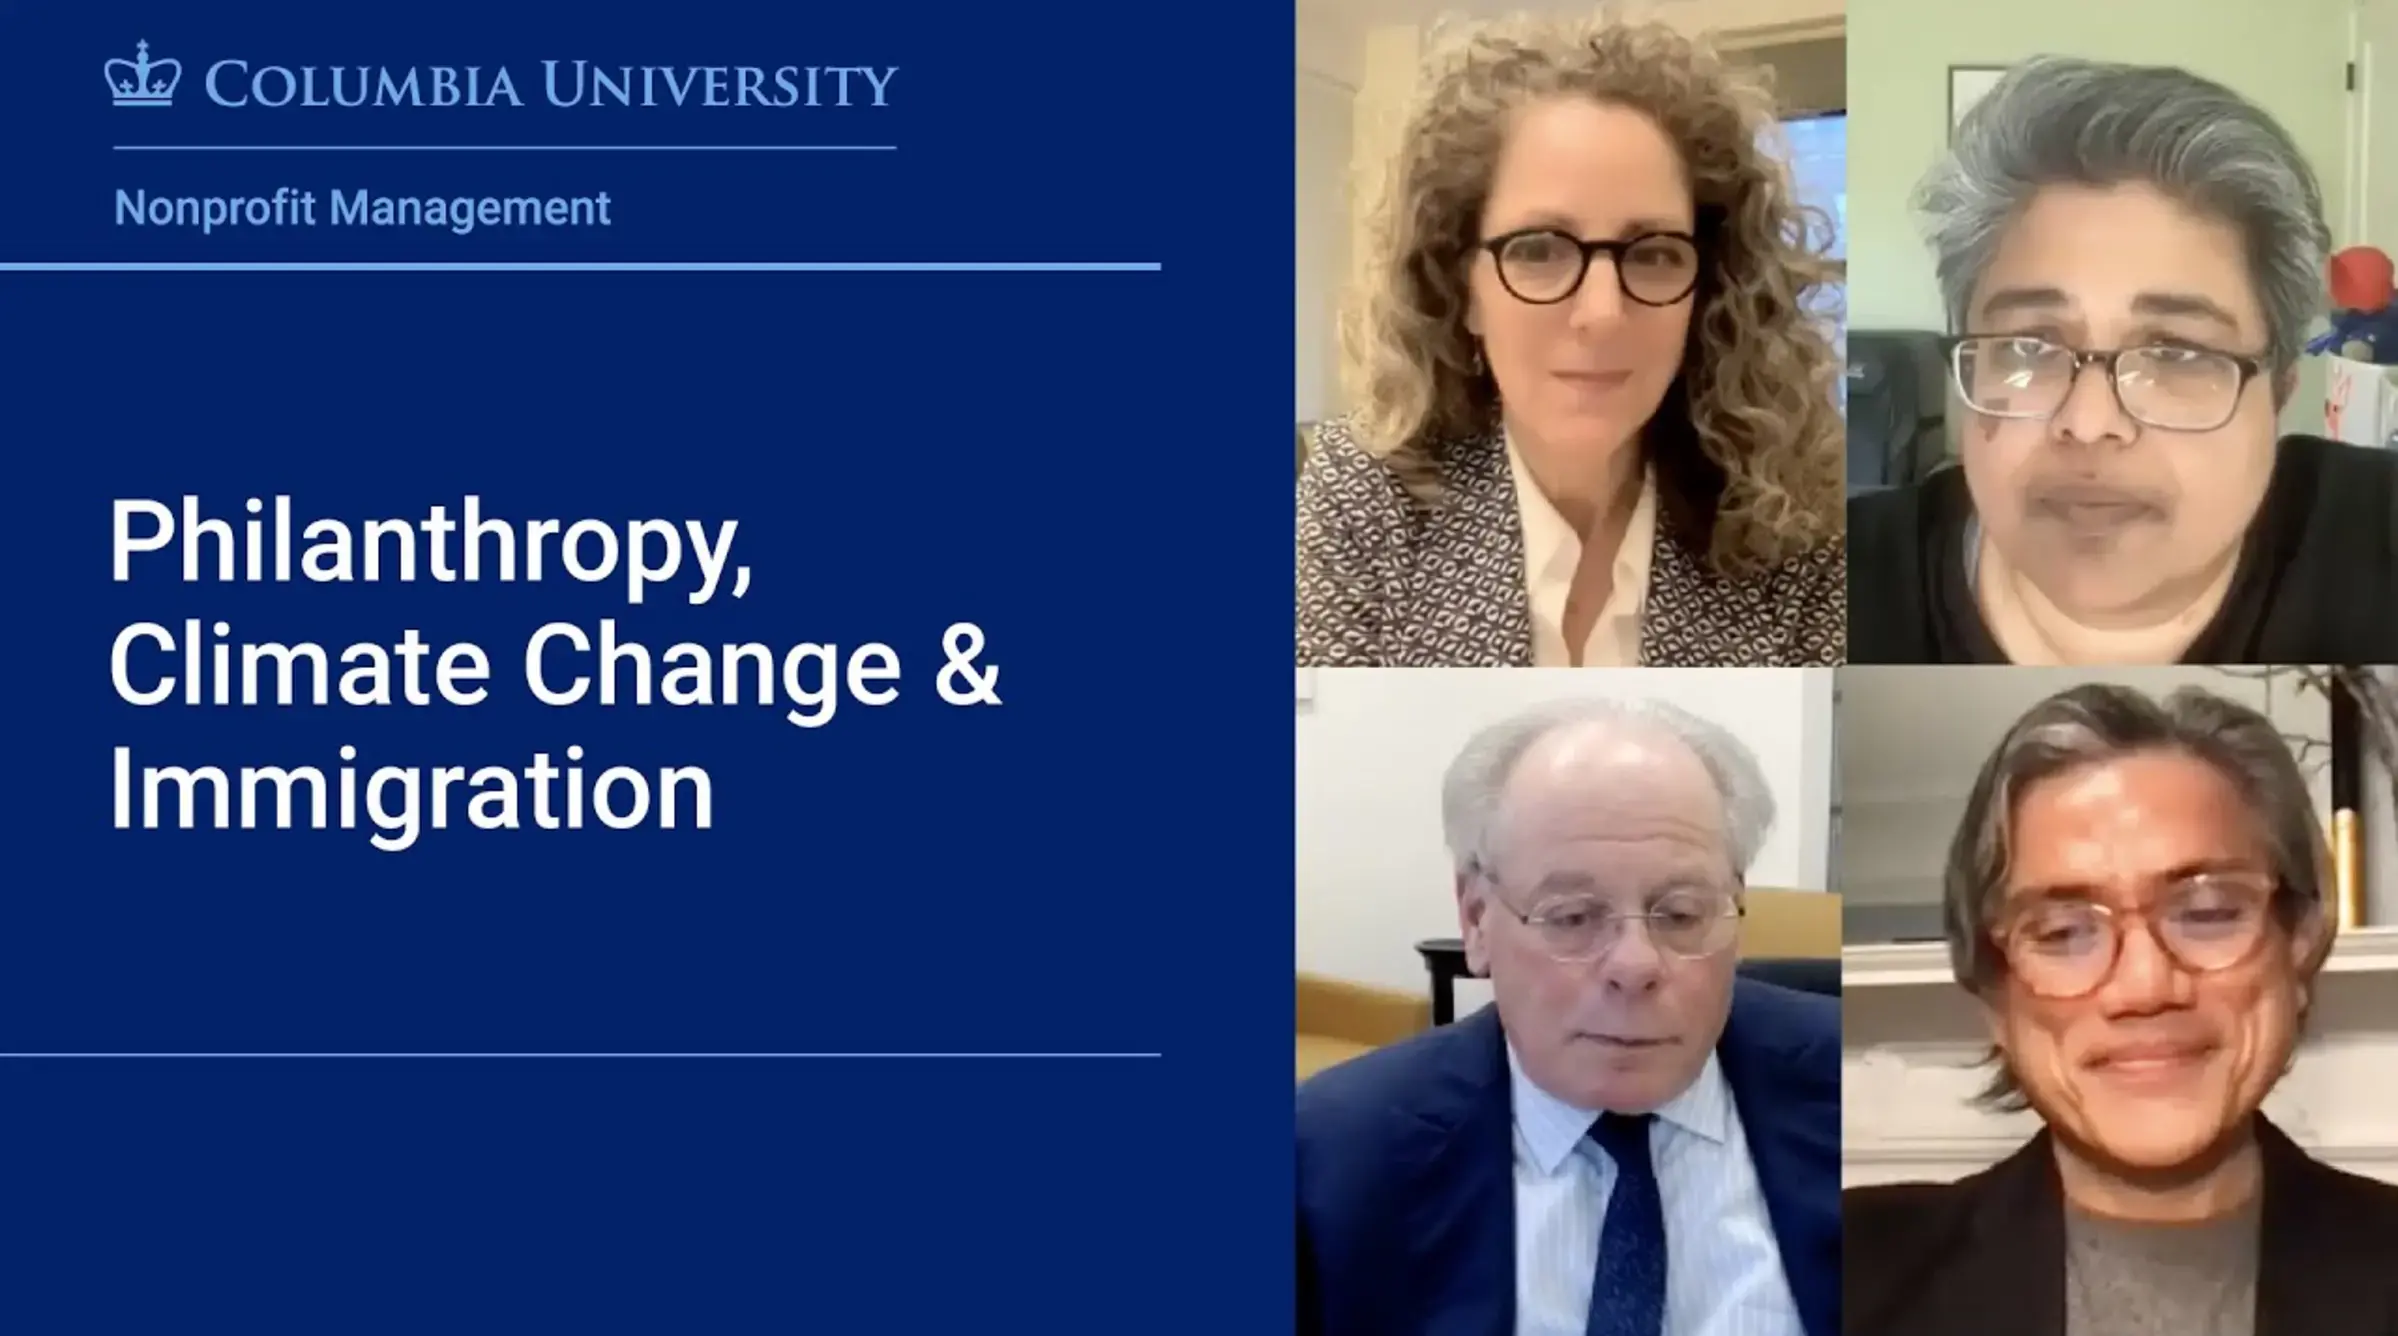 Philanthropy, Climate Change & Immigration: Impact, Challenge & Opportunity